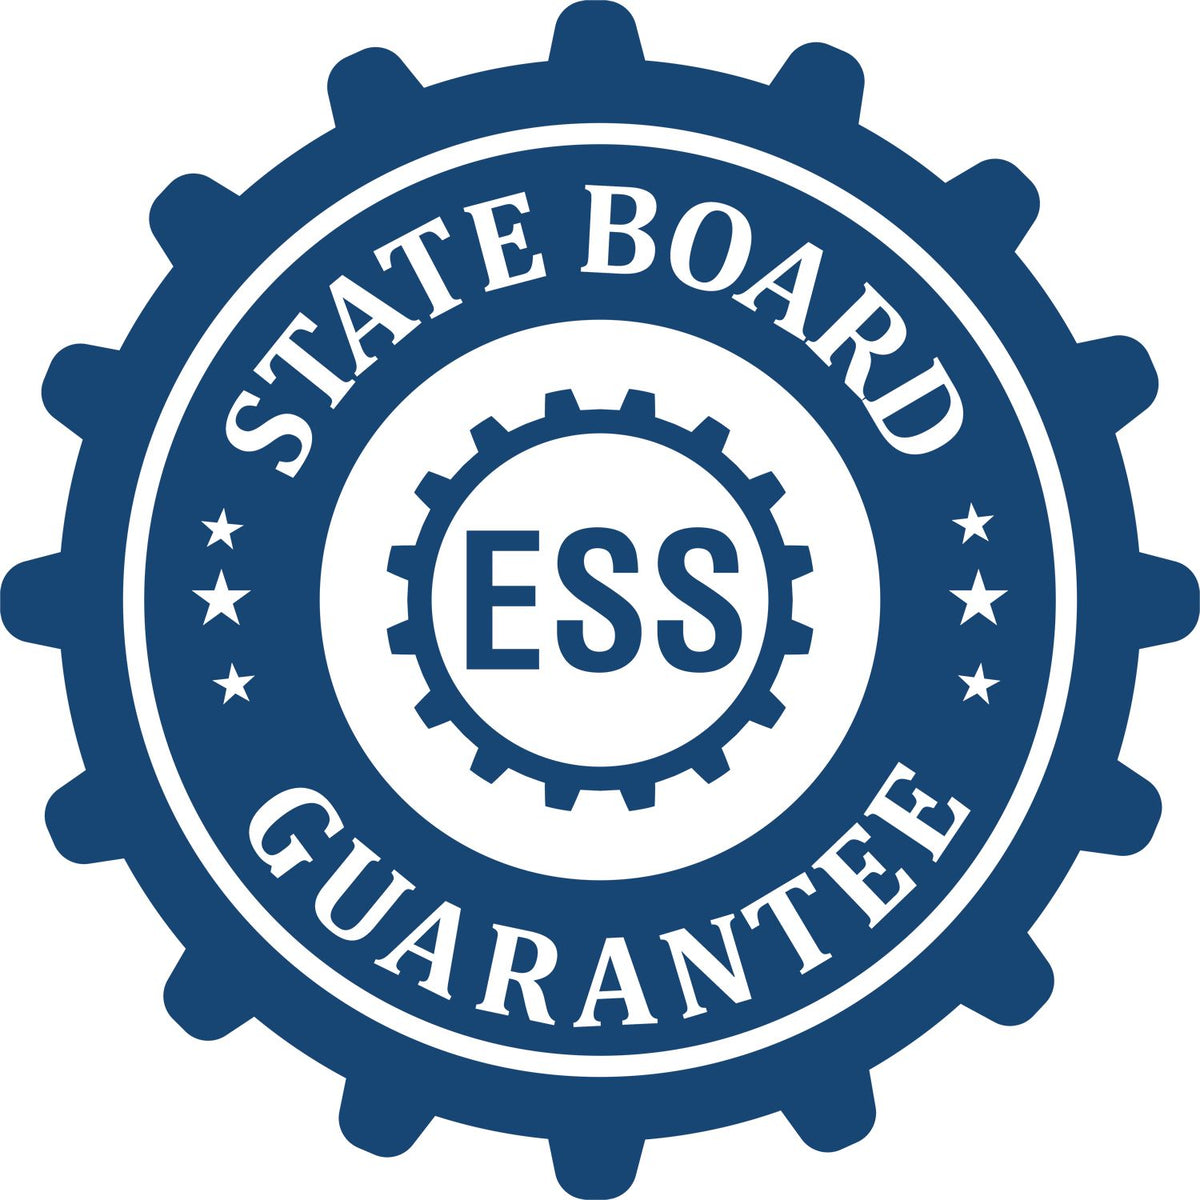 An emblem in a gear shape illustrating a state board guarantee for the Handheld Kansas Land Surveyor Seal product.